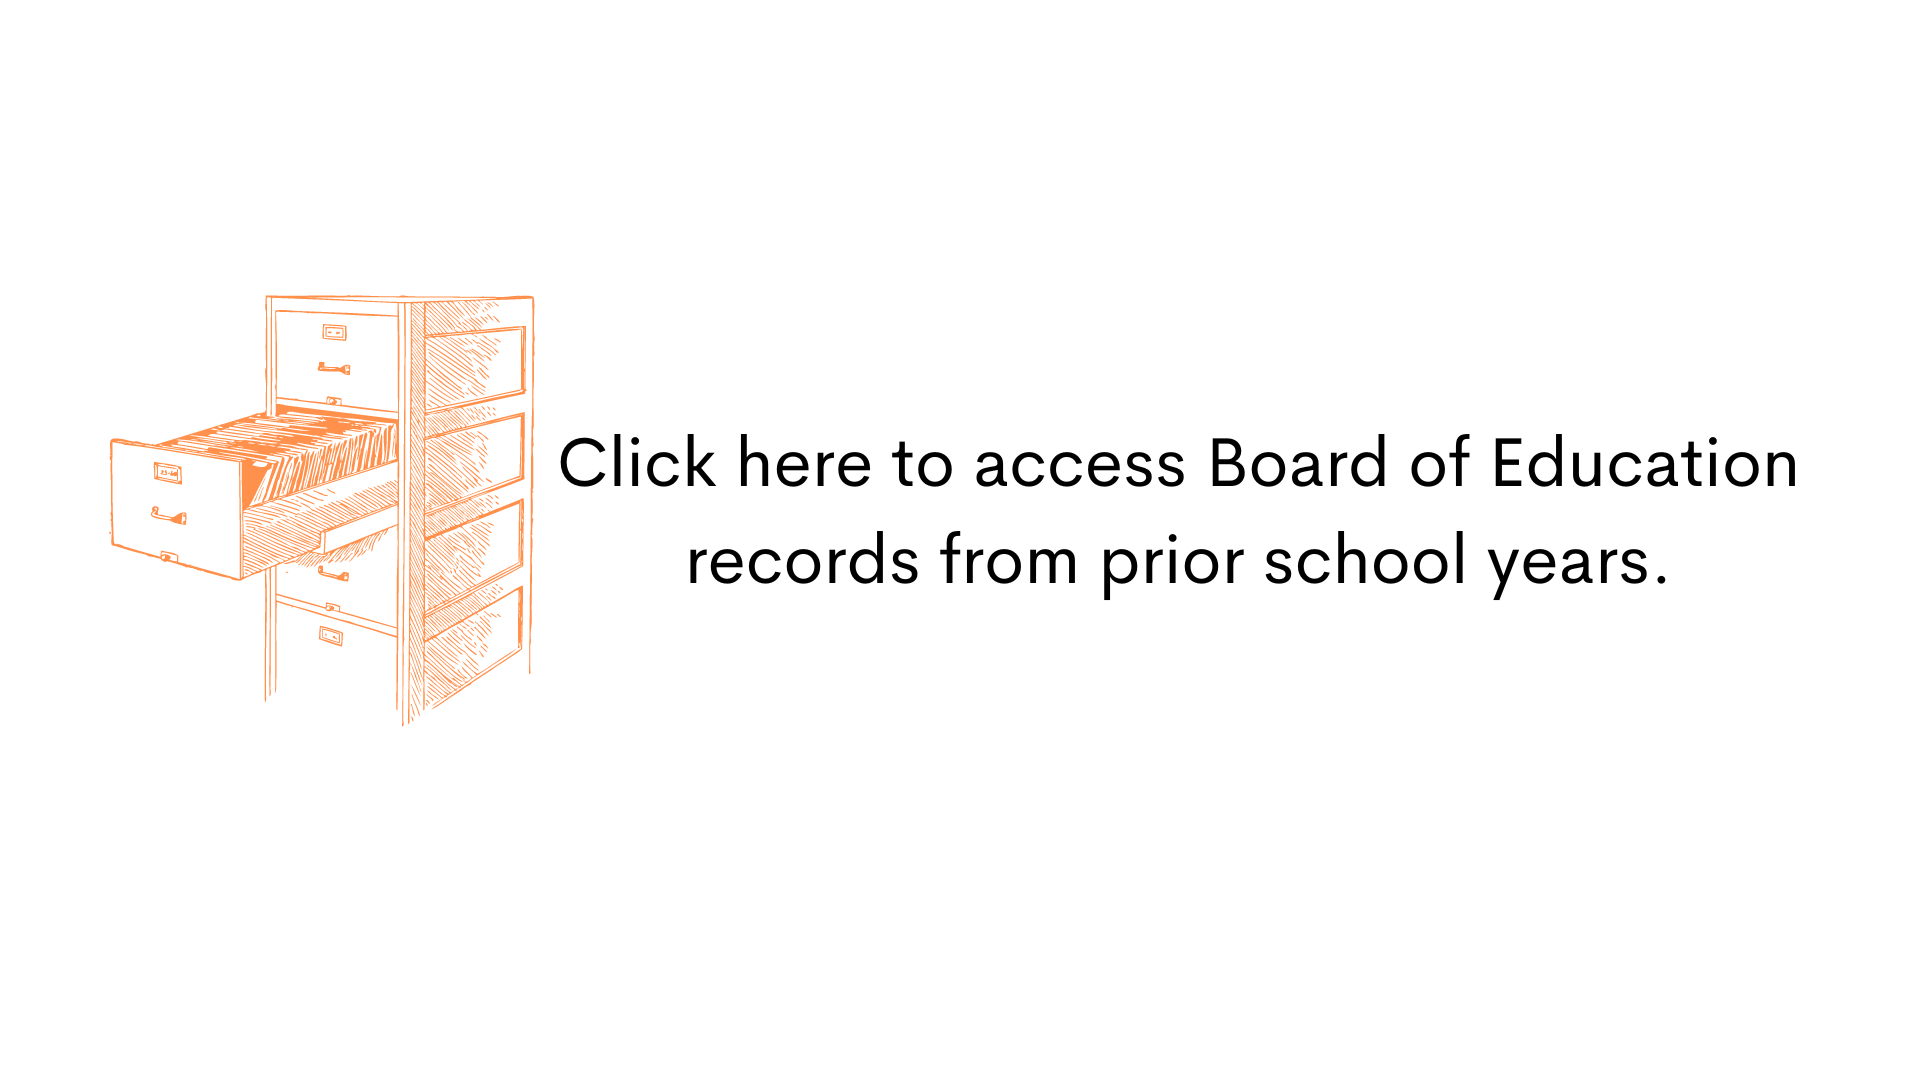 Picture of a file cabinet with a message that says "Click here to access Board of Education records from prior school years."